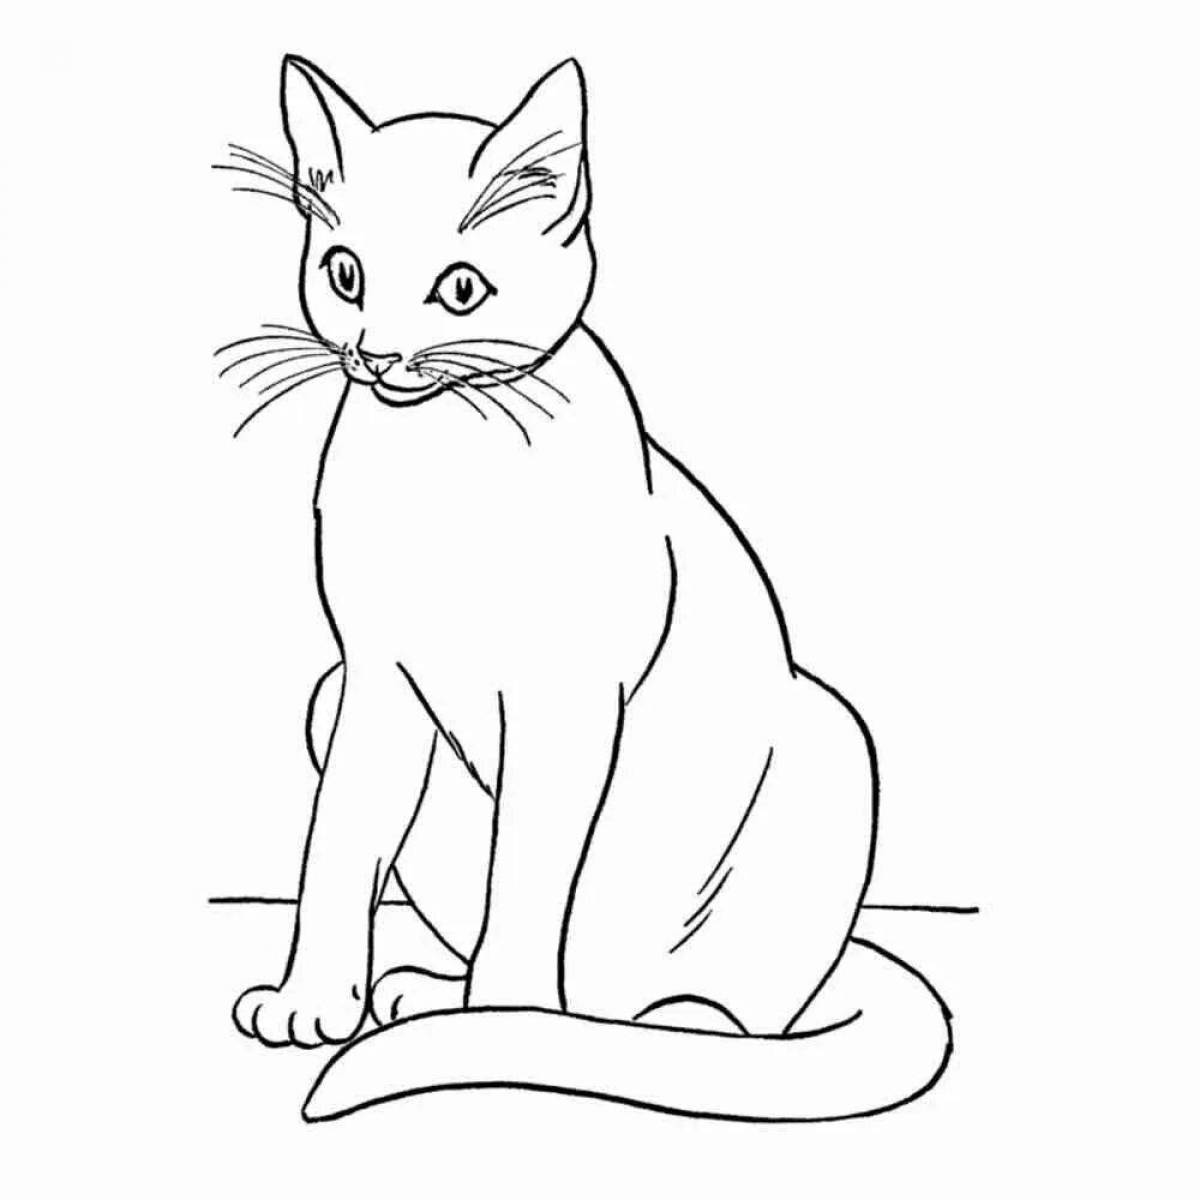 Live white cat coloring book